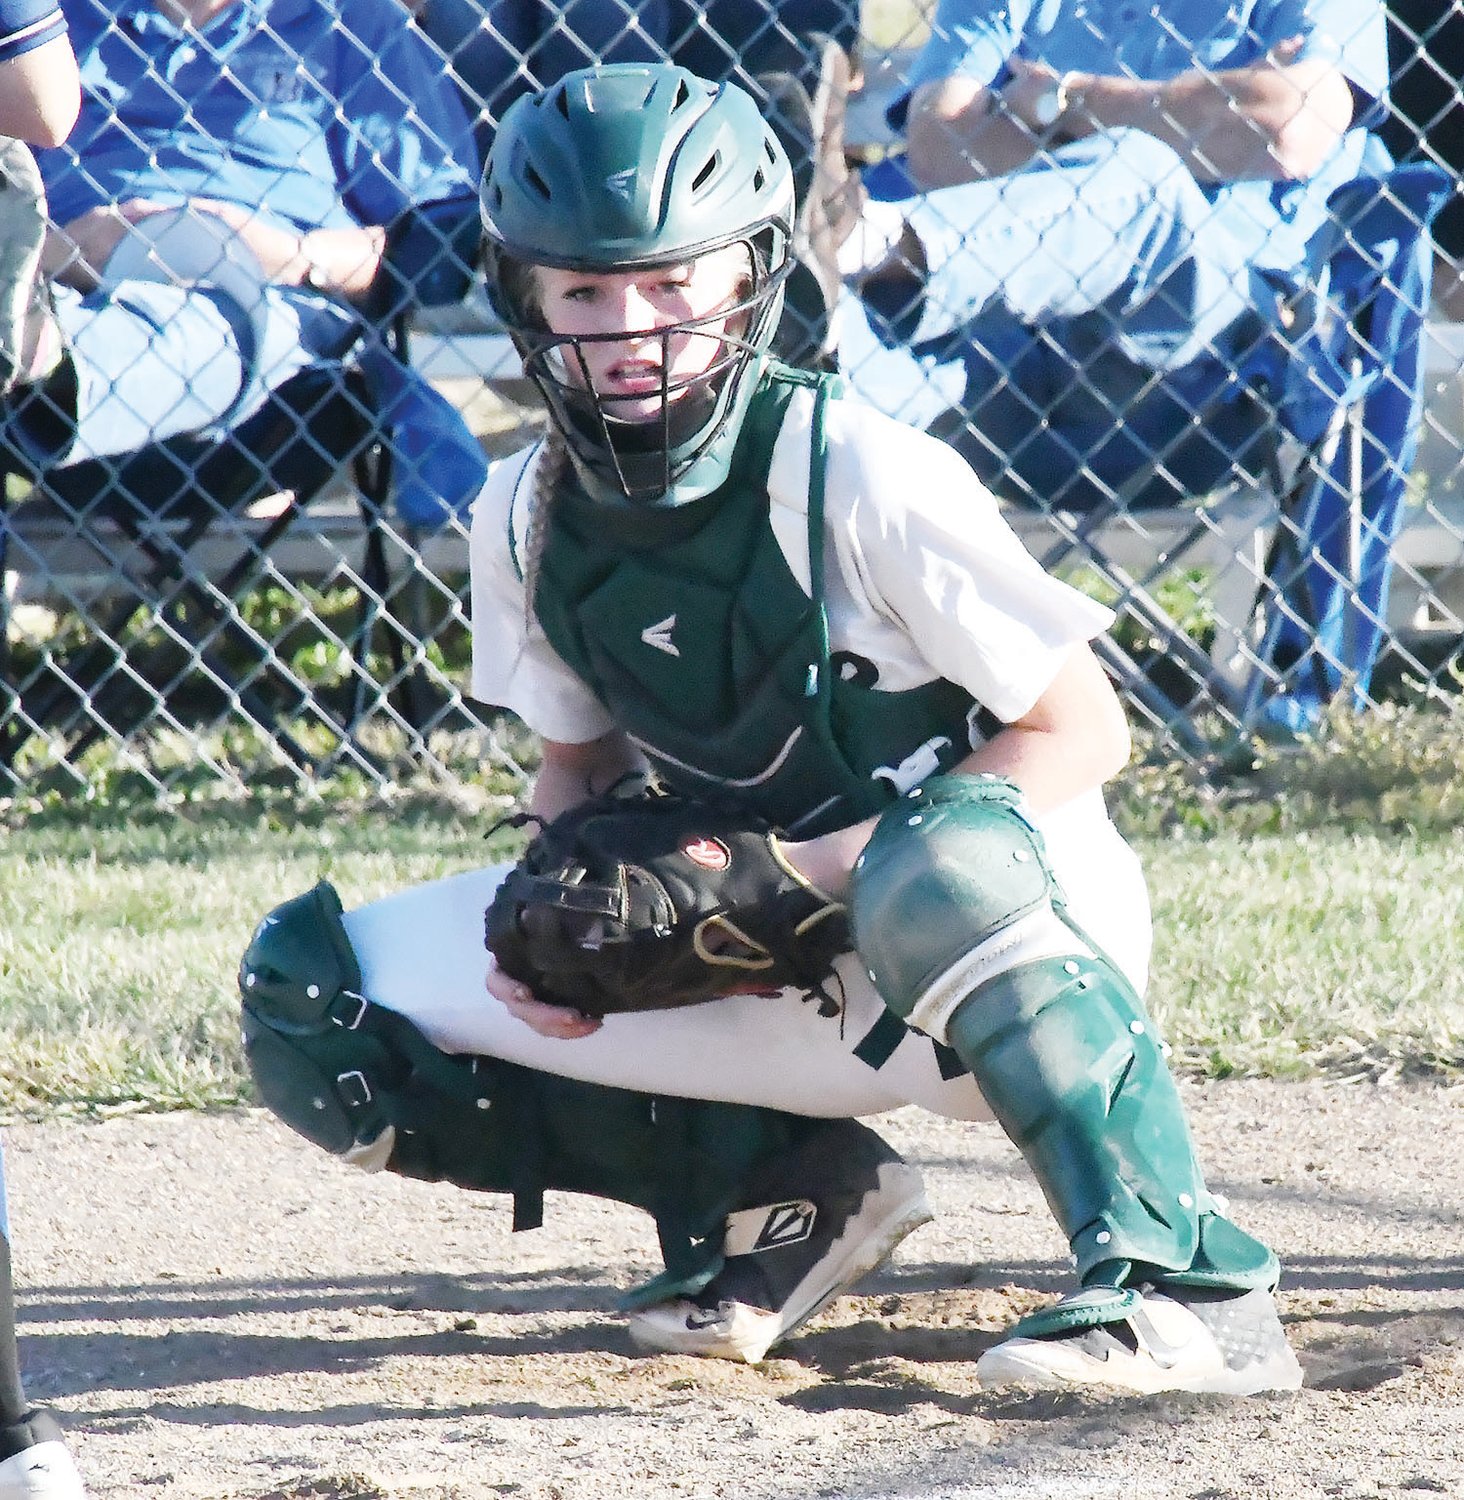 Catcher Ryann Derboven looks for what pitch to call during the third inning.